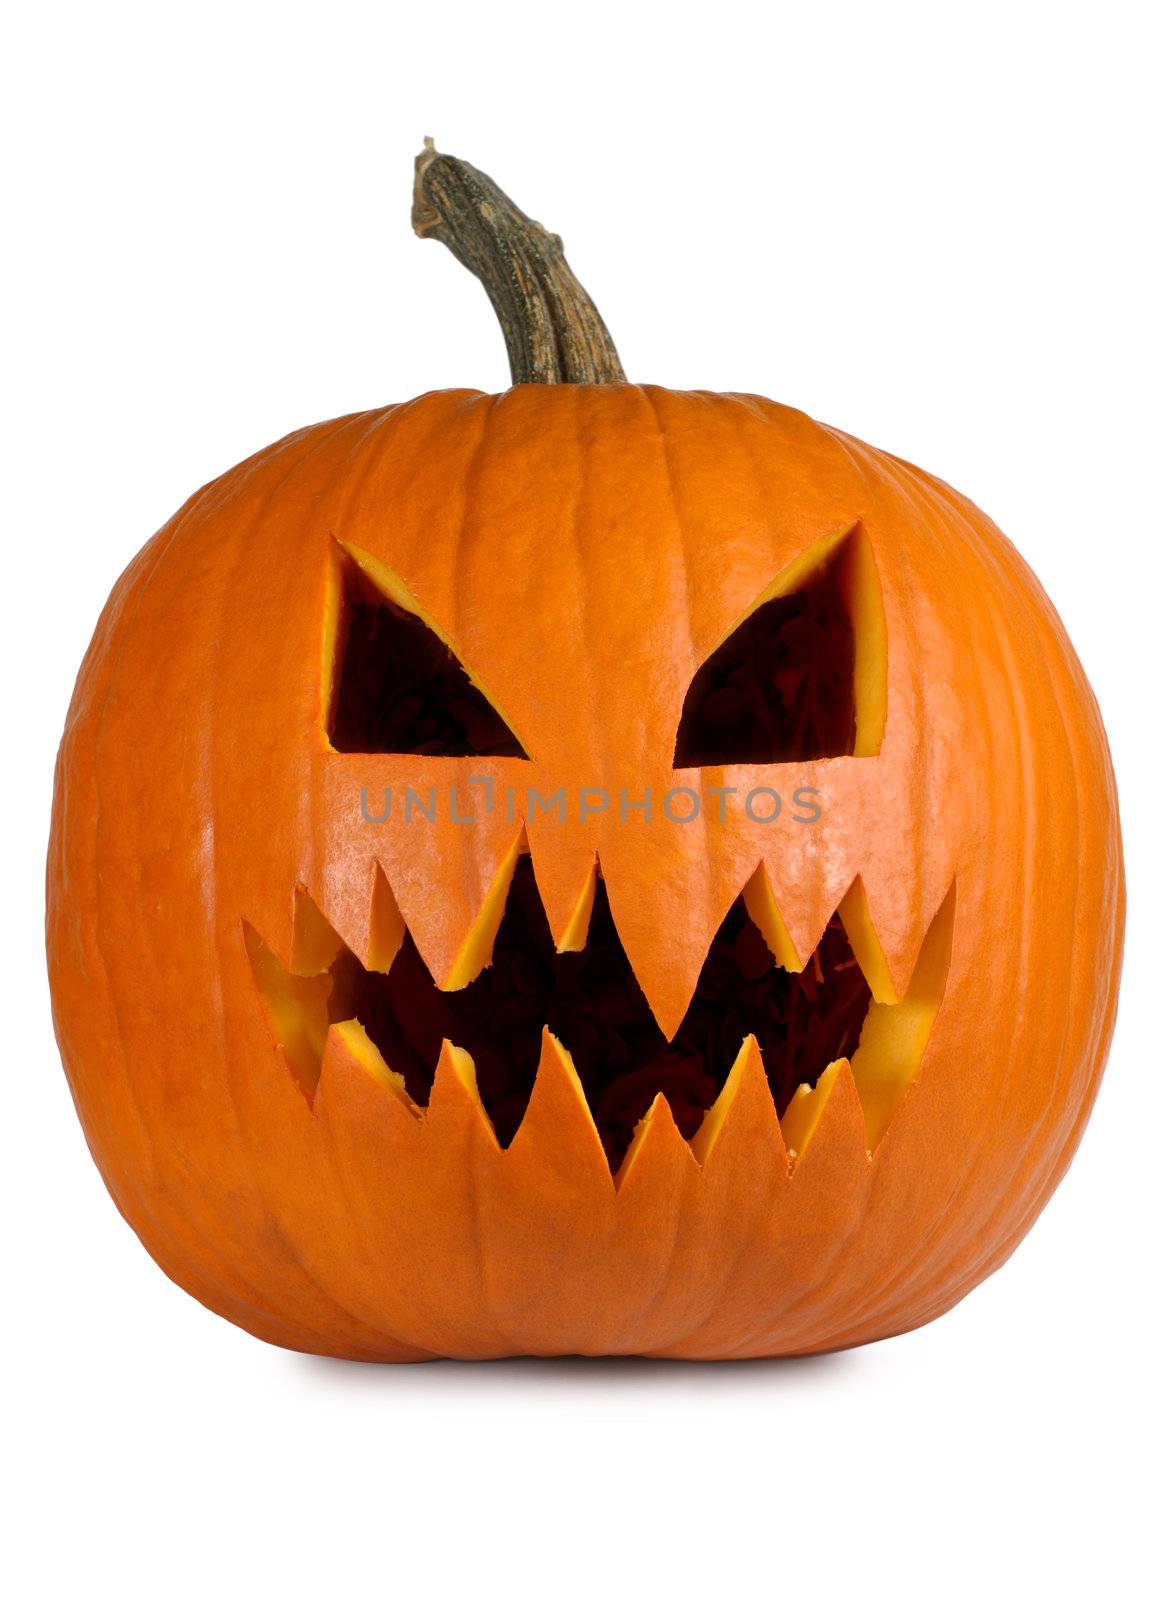 Photograph of a isolated carved evil pumpkin. Clipping path included.